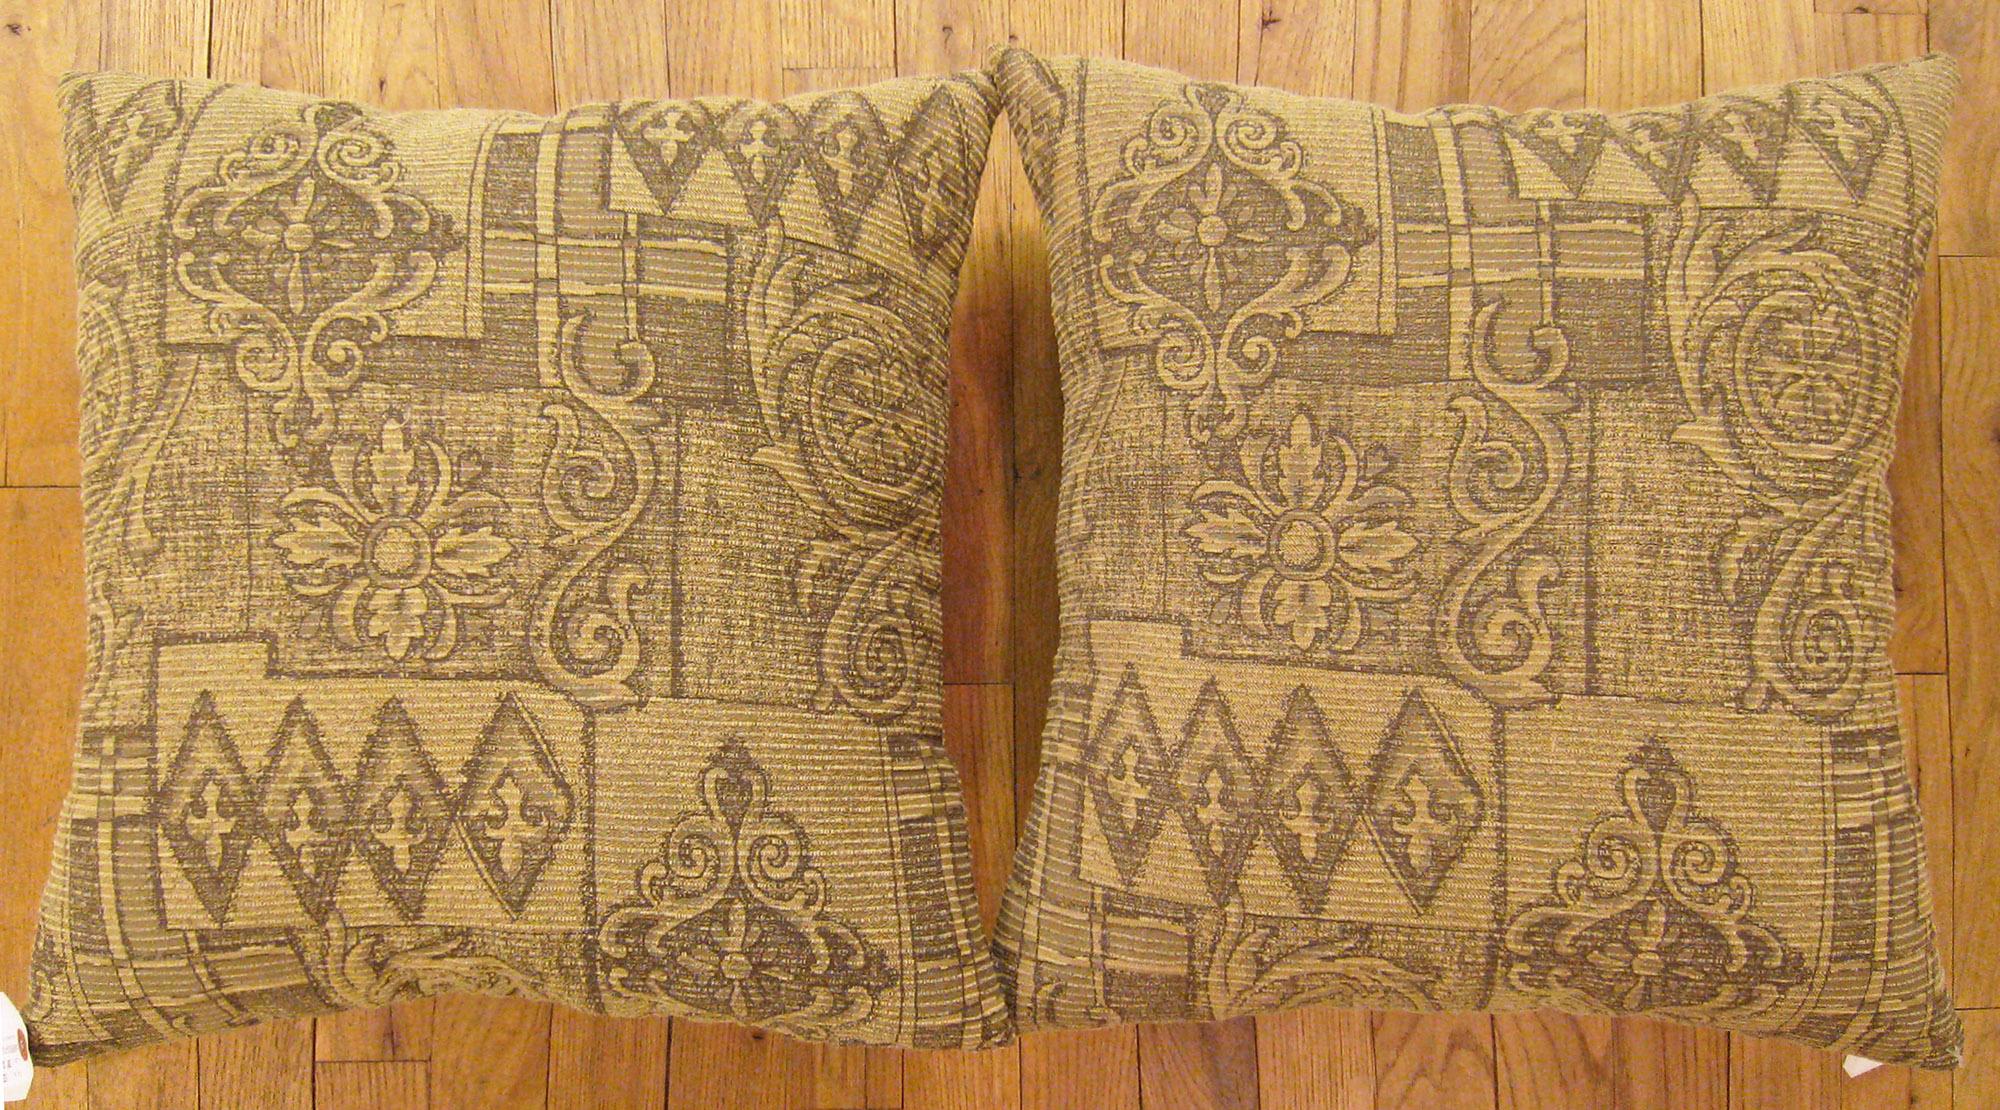 Pair of Decorative Vintage Floro-Geometric Fabric Pillows In Good Condition For Sale In New York, NY